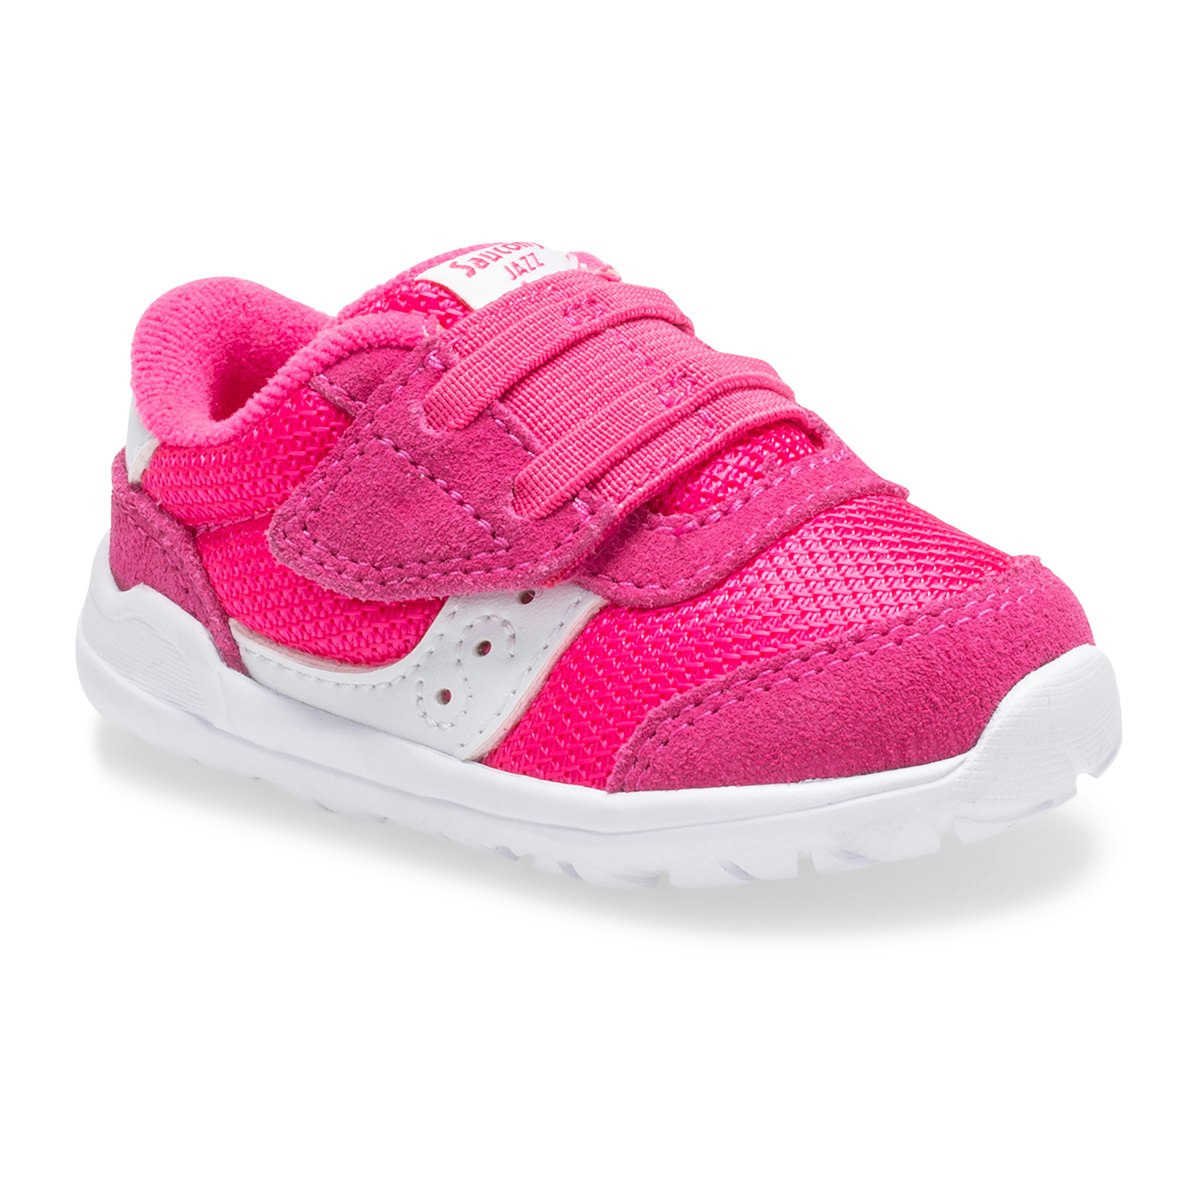 are saucony shoes good for toddlers